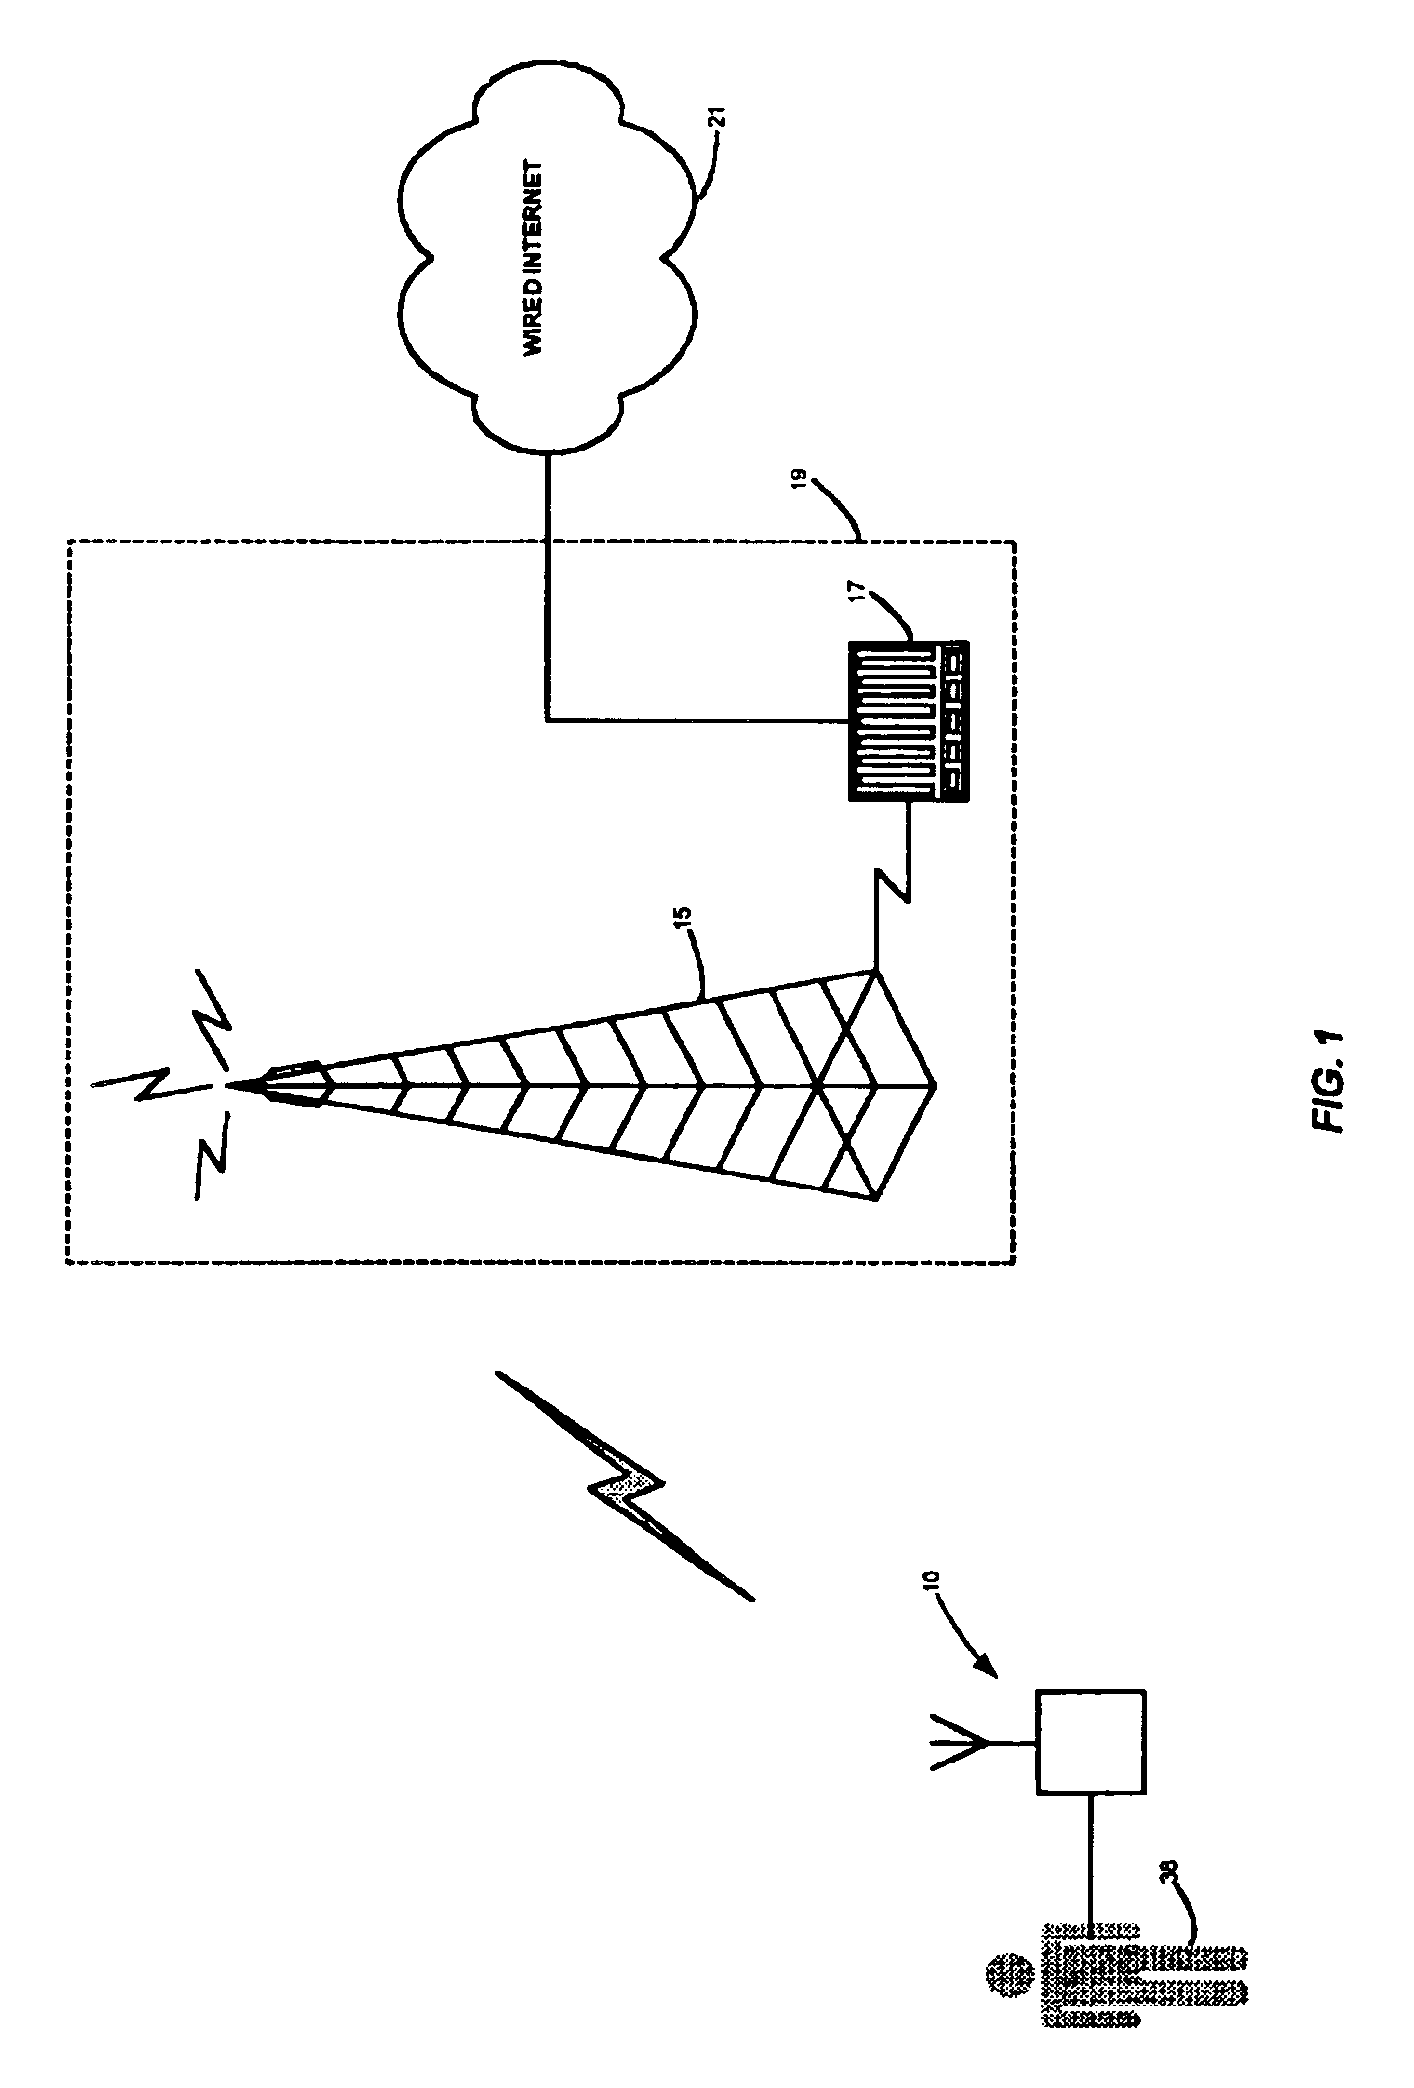 Method and apparatus for health and disease management combining patient data monitoring with wireless internet connectivity